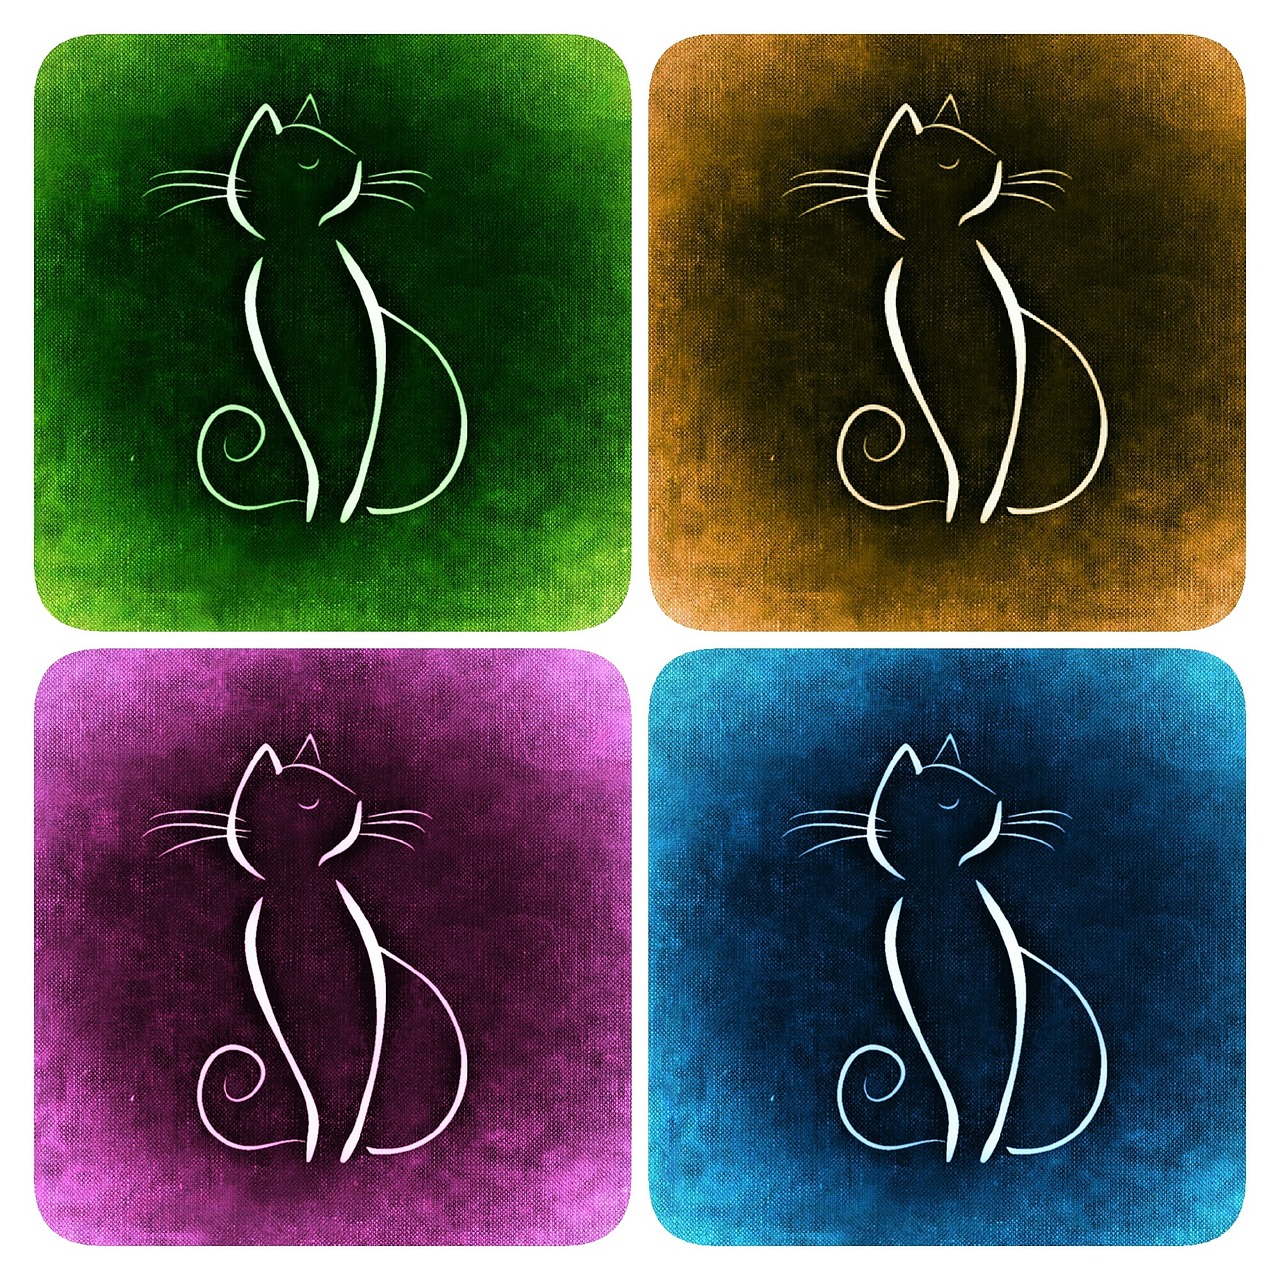 cat collage drawing free photo